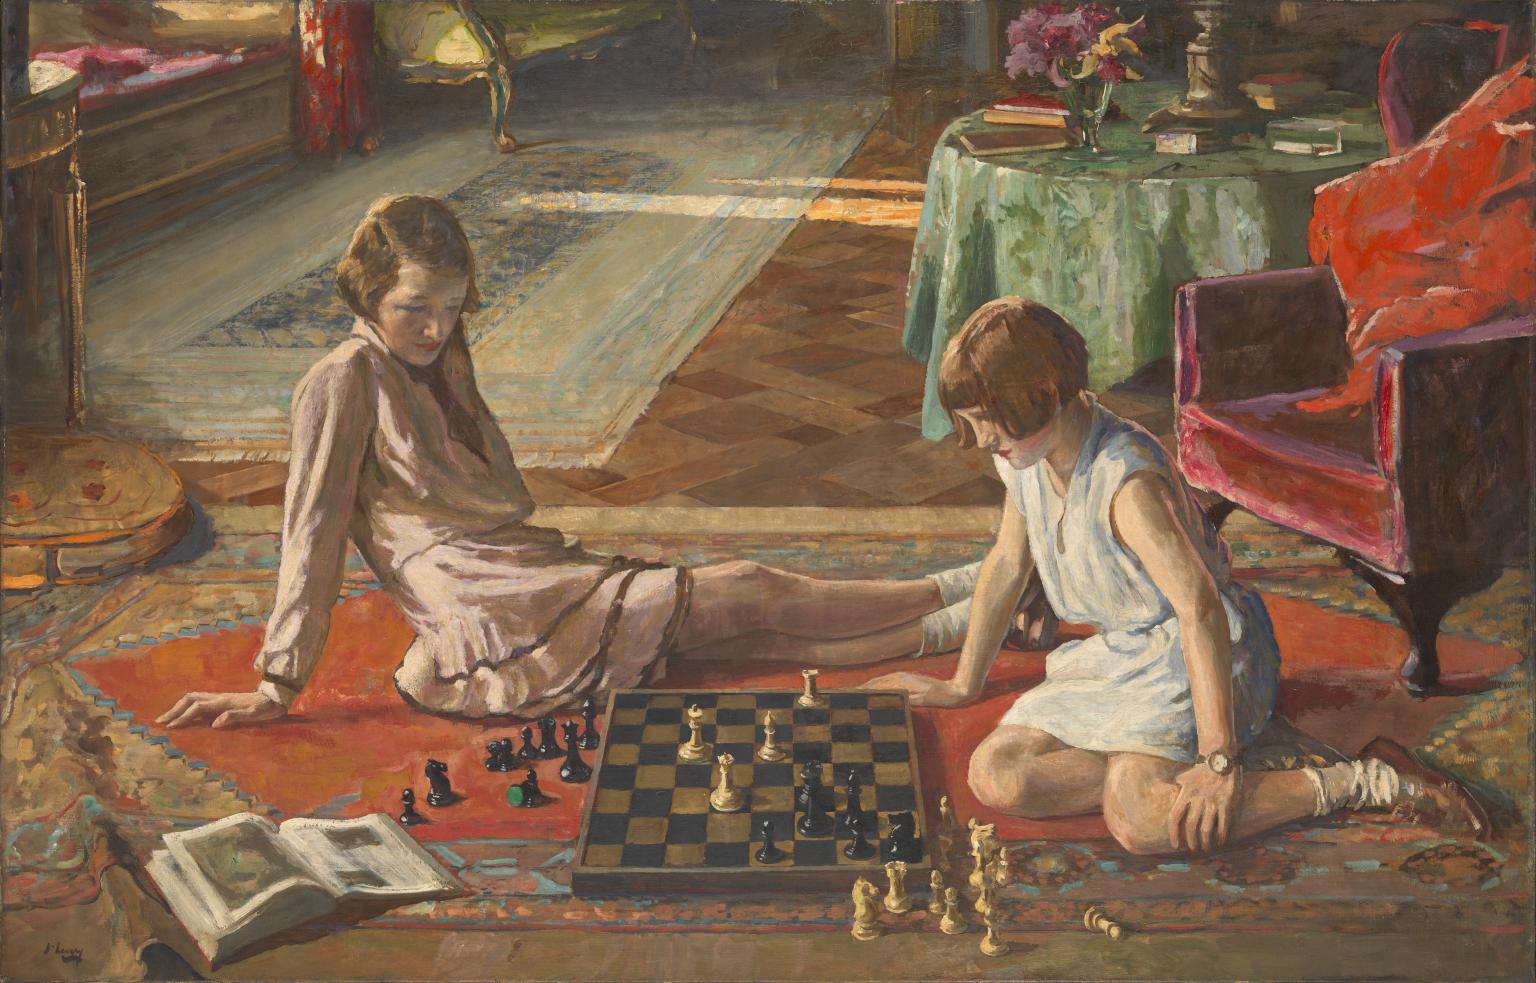 Illustration of two girl playing a game in a dream. This image is shown for those who are looking to understand the meaning of dreaming of a game.